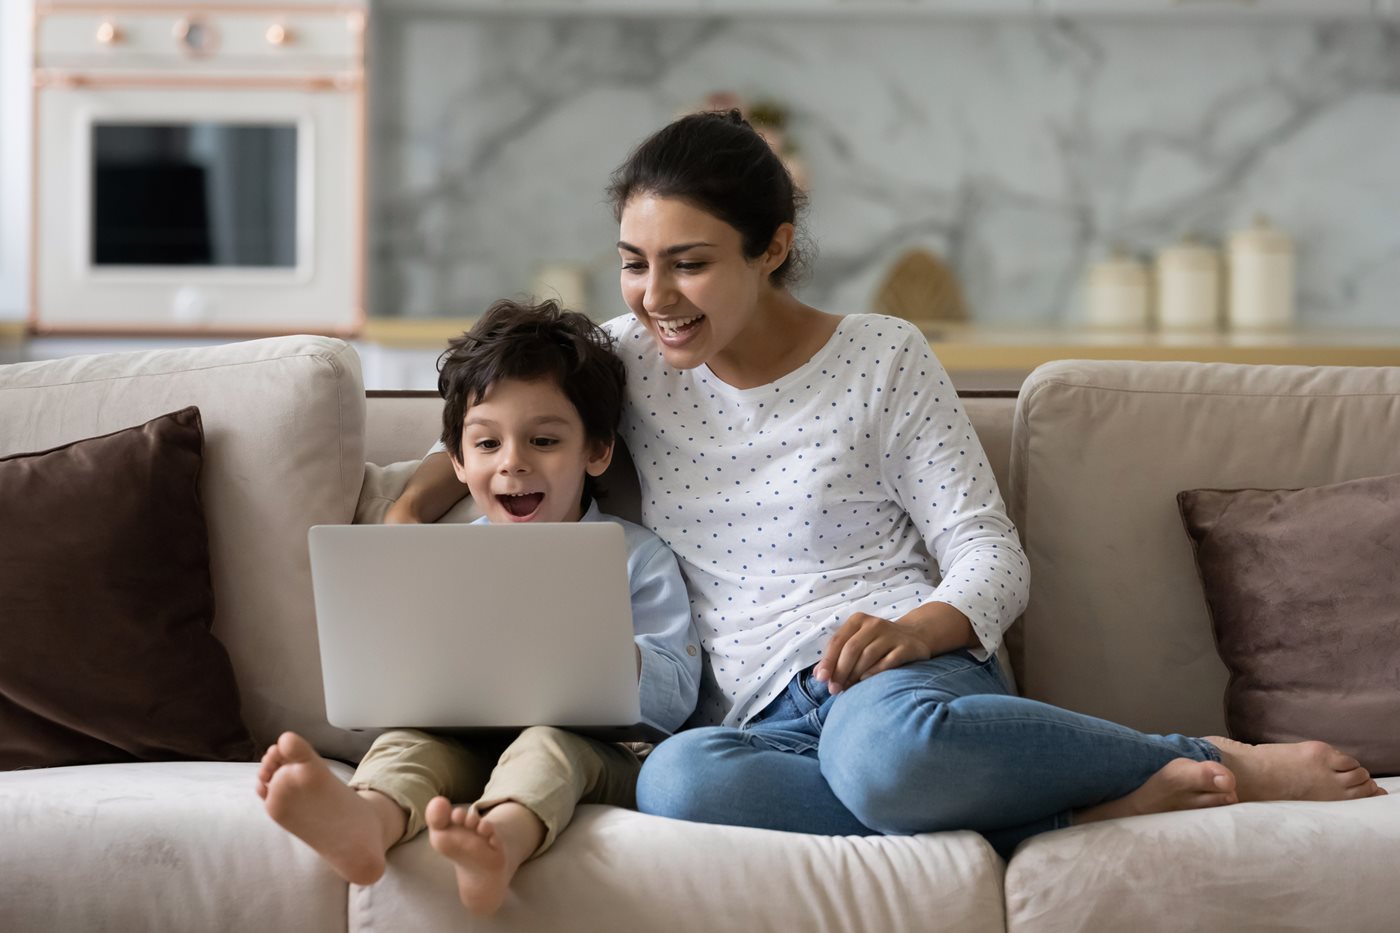 A mom and son sit together on a couch while looking at a laptop exploring Xfinity services